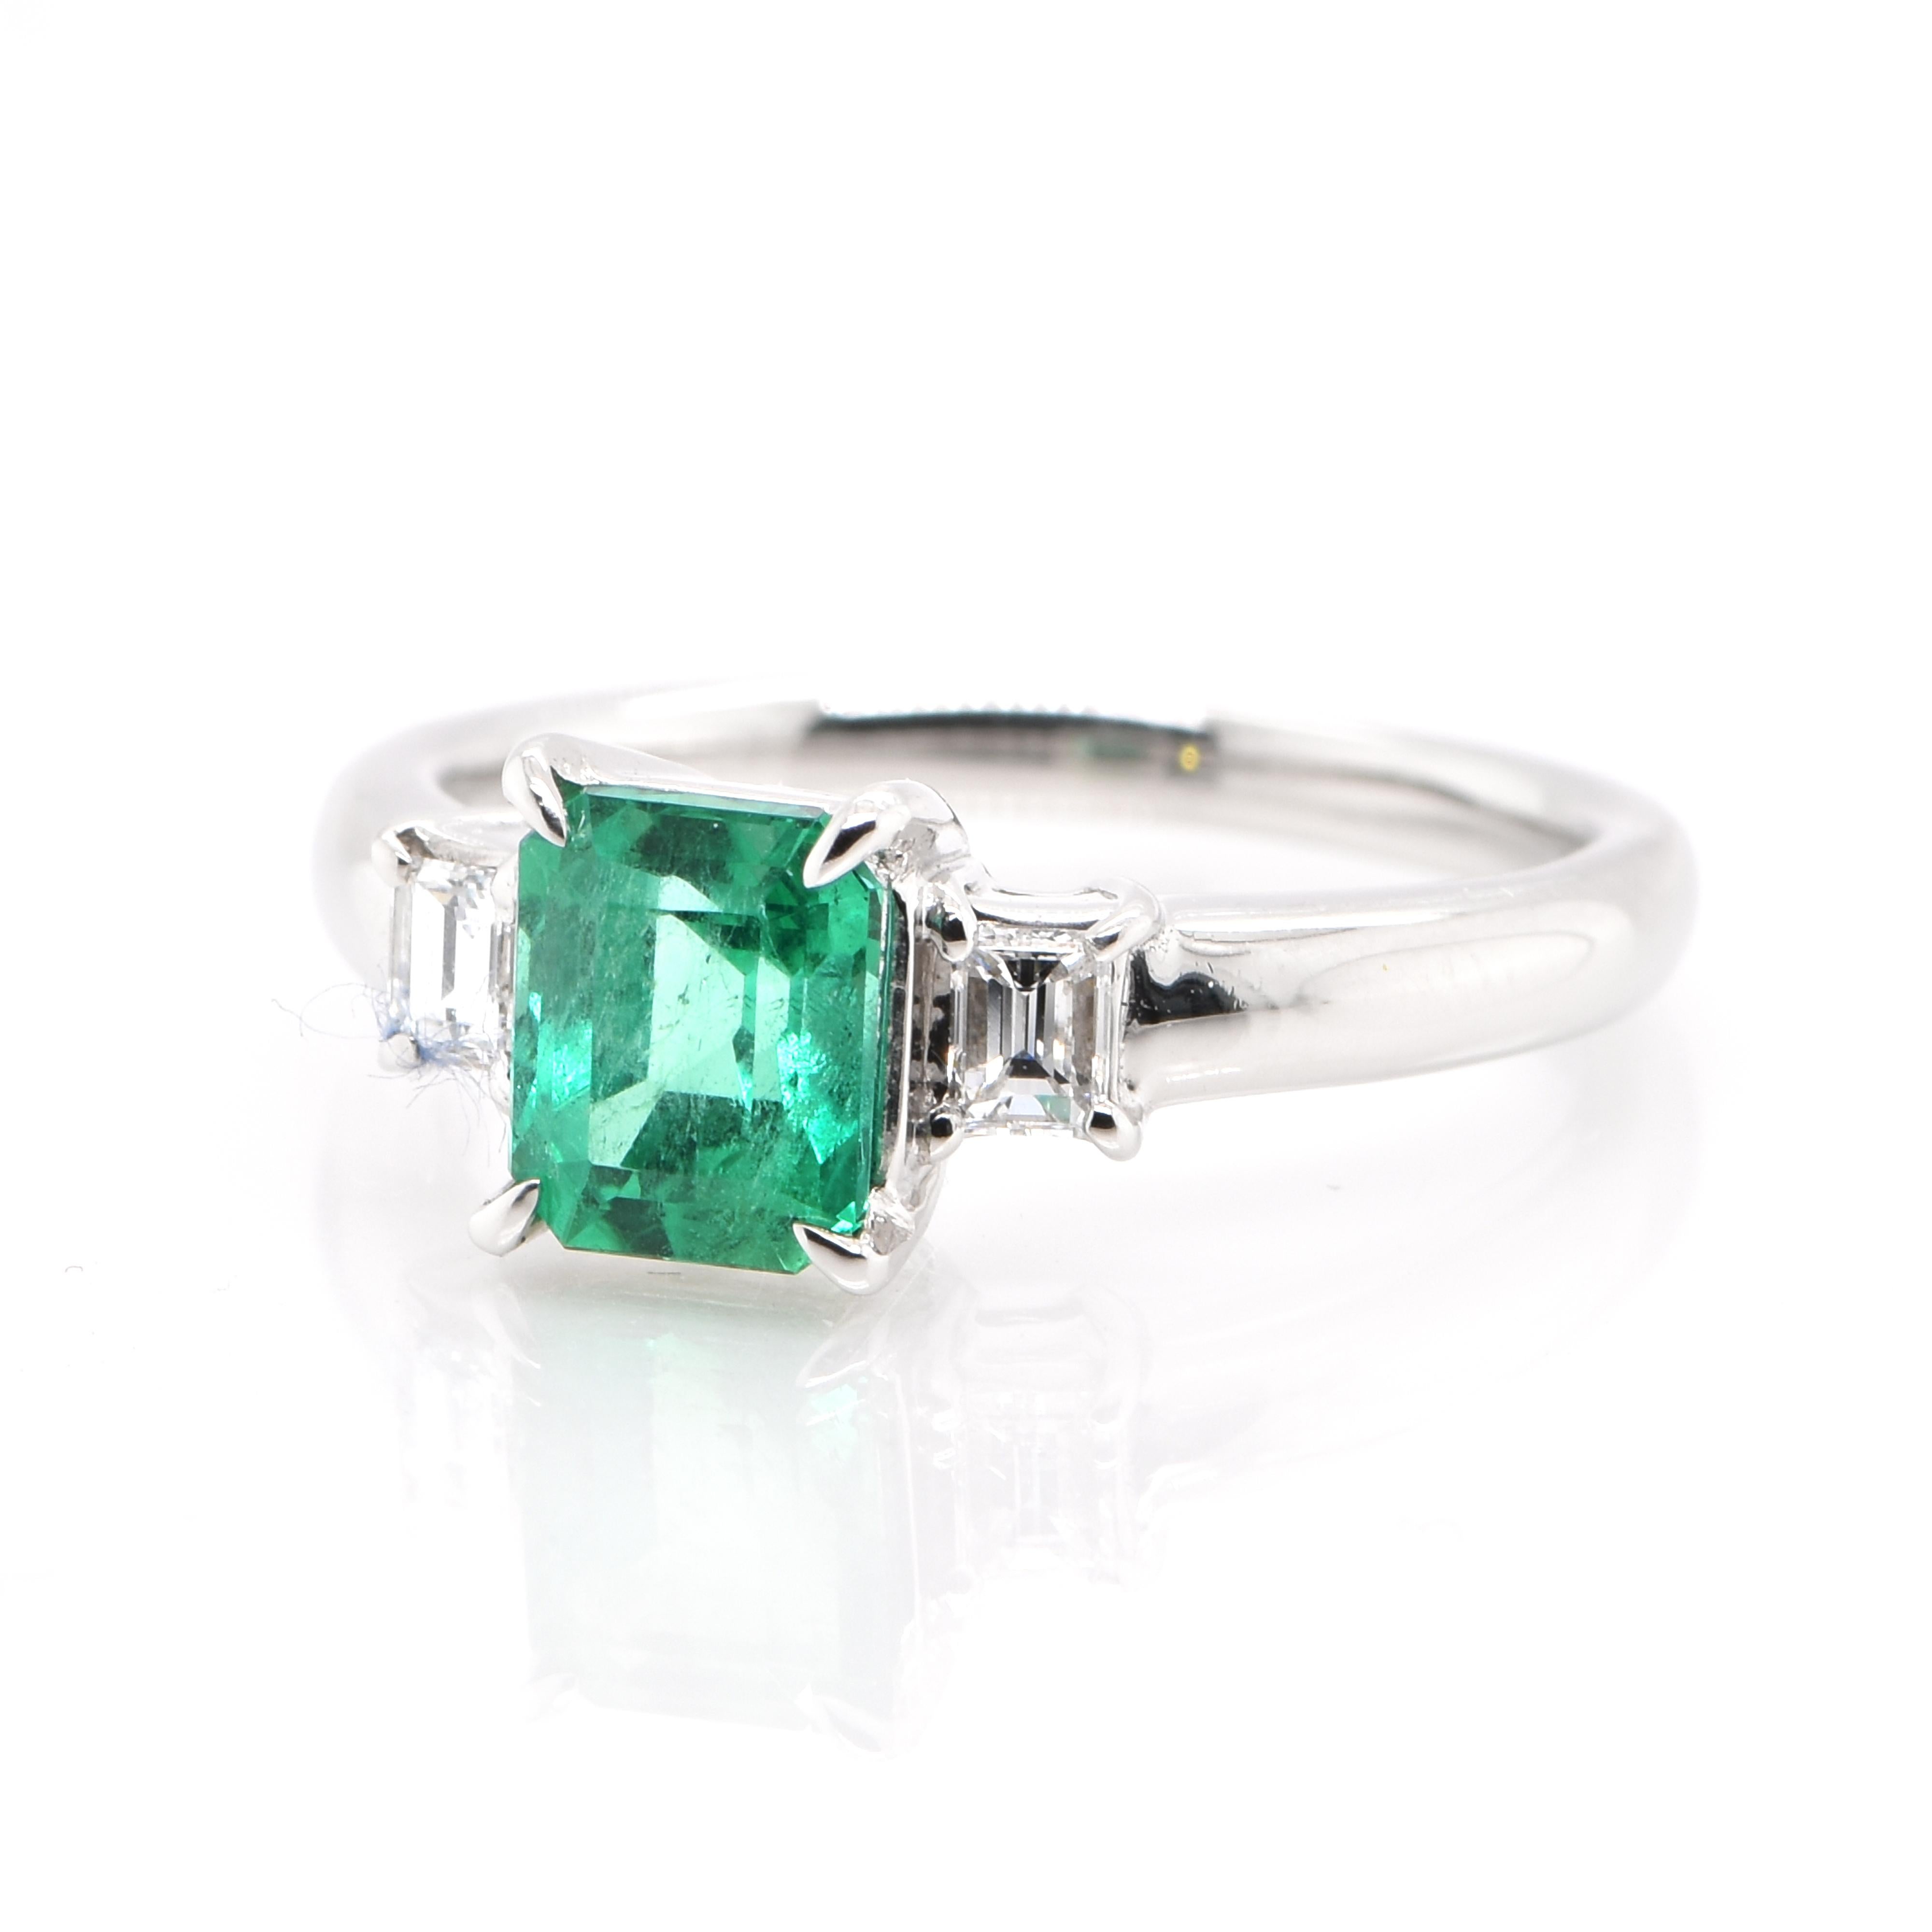 A stunning Ring featuring a 1.08 Carat, Natural, Colombian Emerald and 0.20 Carats of Diamond Accents set in Platinum. People have admired emerald’s green for thousands of years. Emeralds have always been associated with the lushest landscapes and